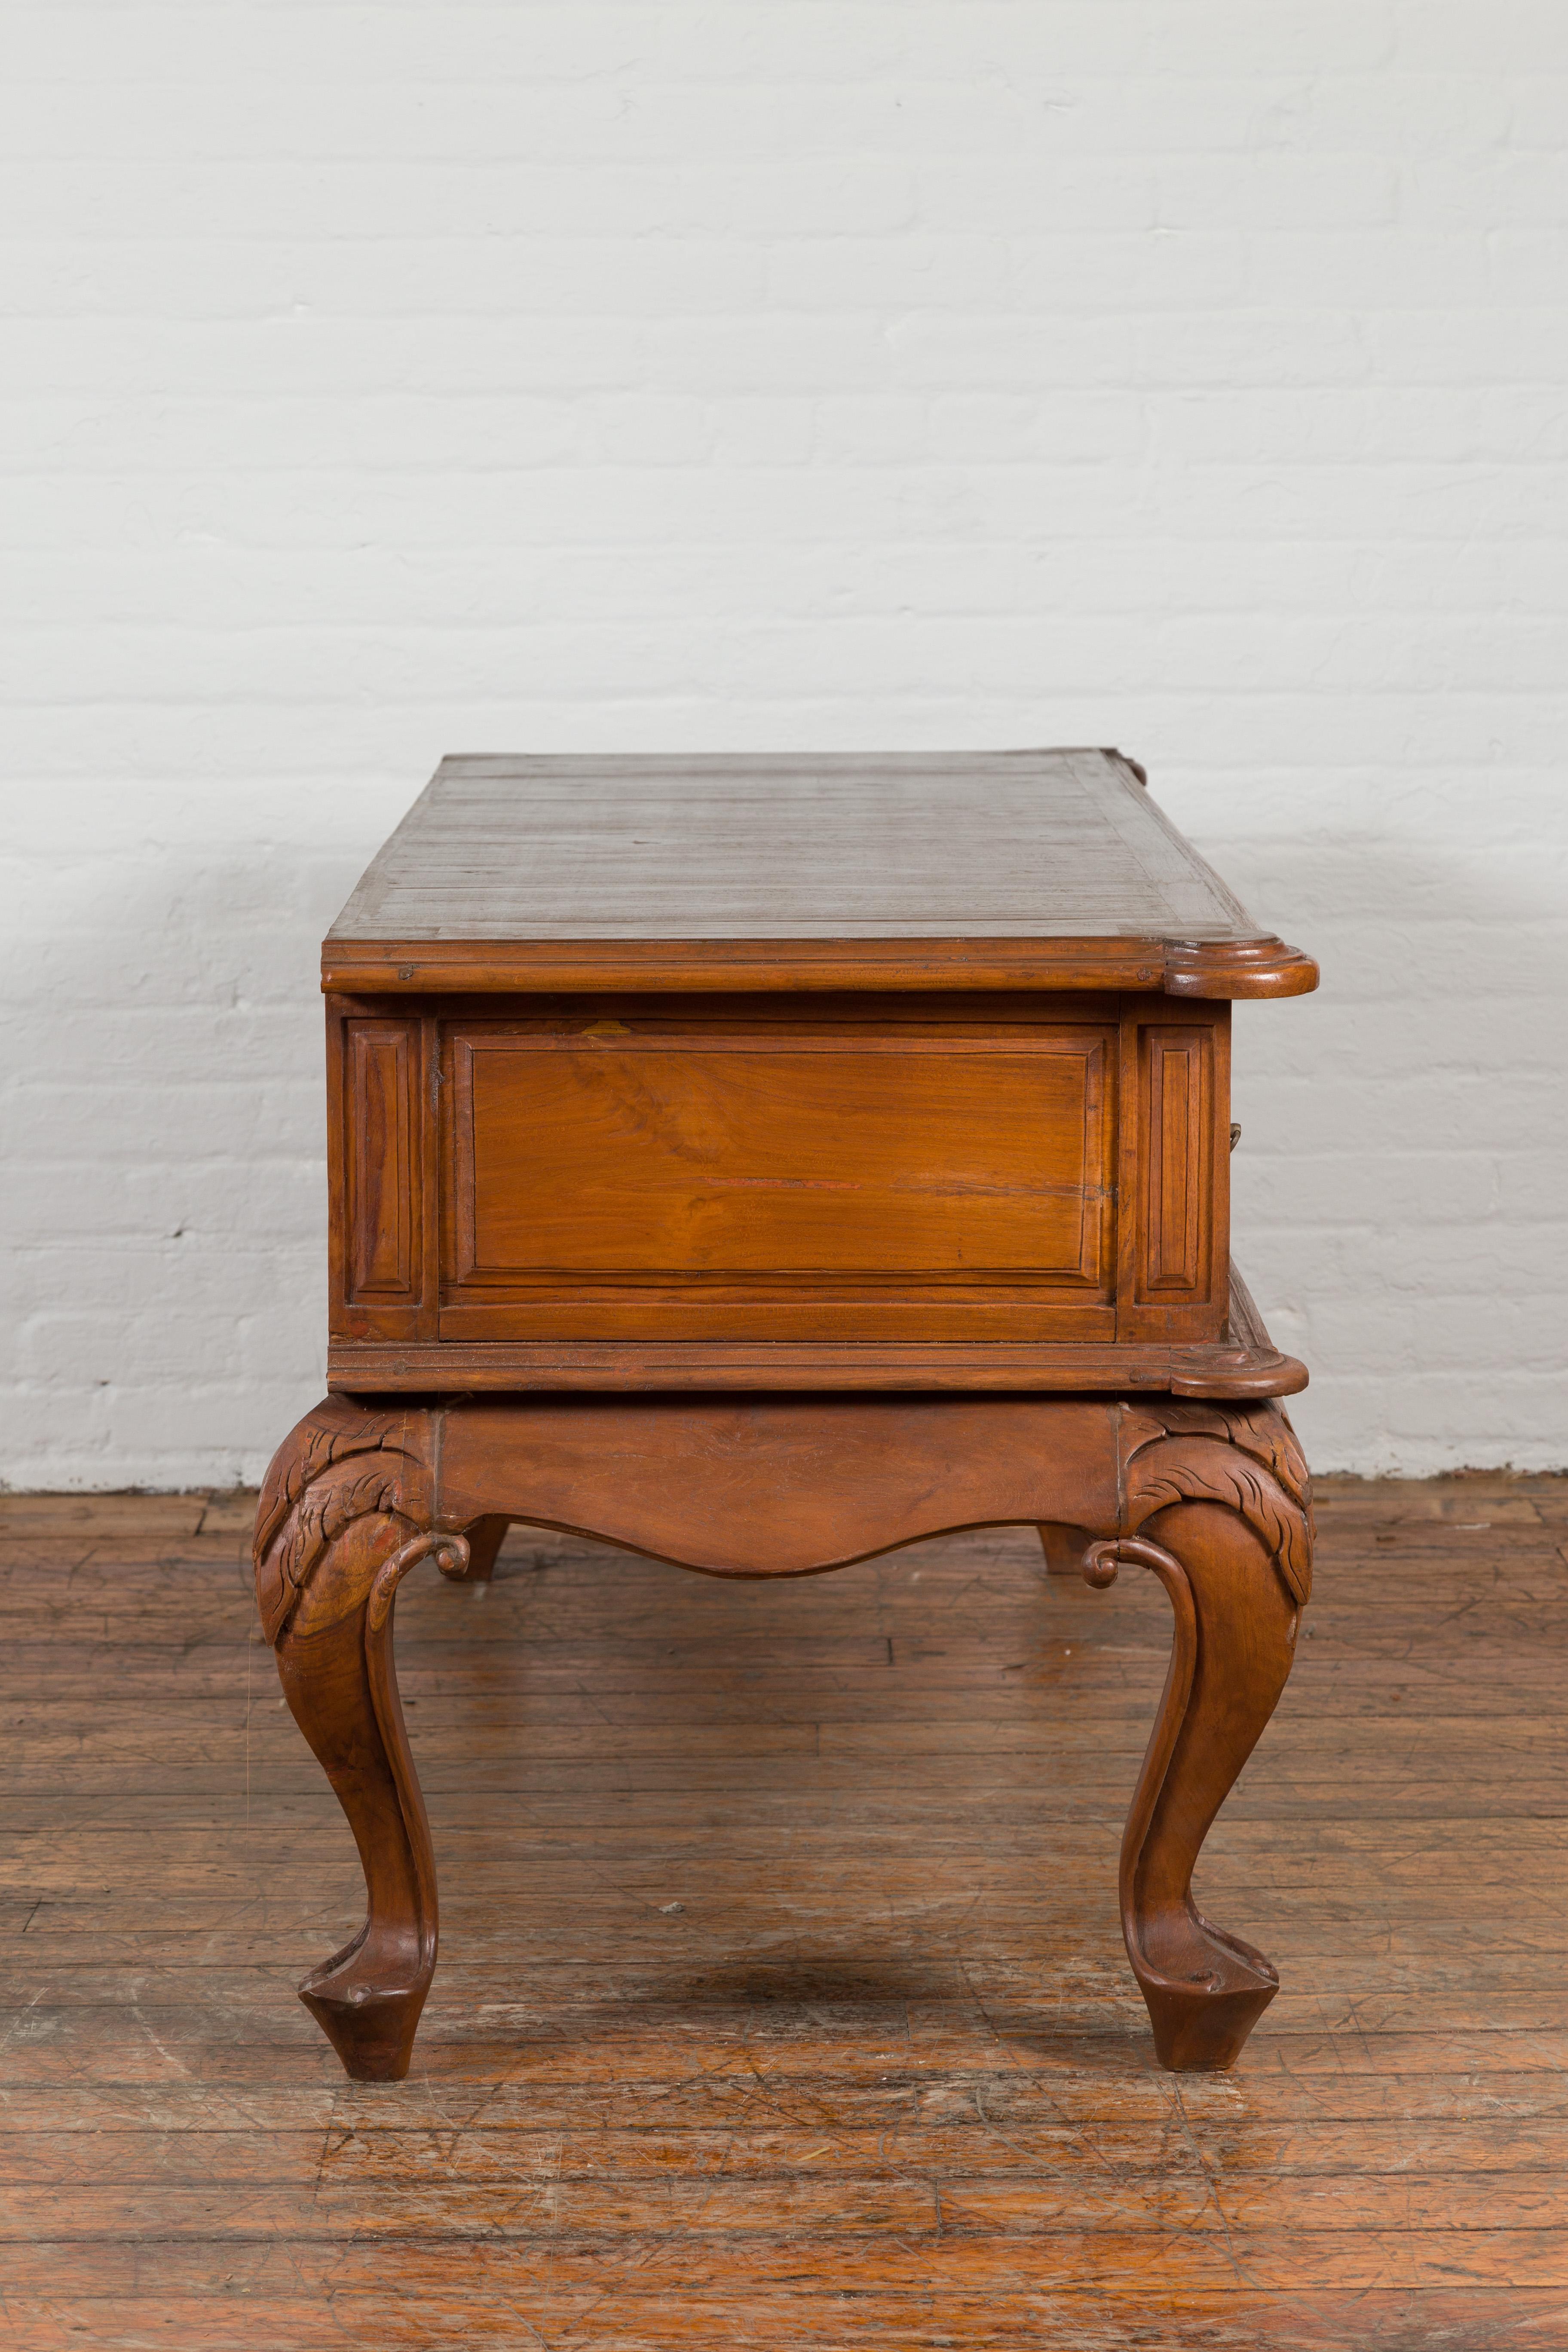 Dutch Colonial Early 20th Century Low Table with Two Drawers and Cabriole Legs For Sale 5